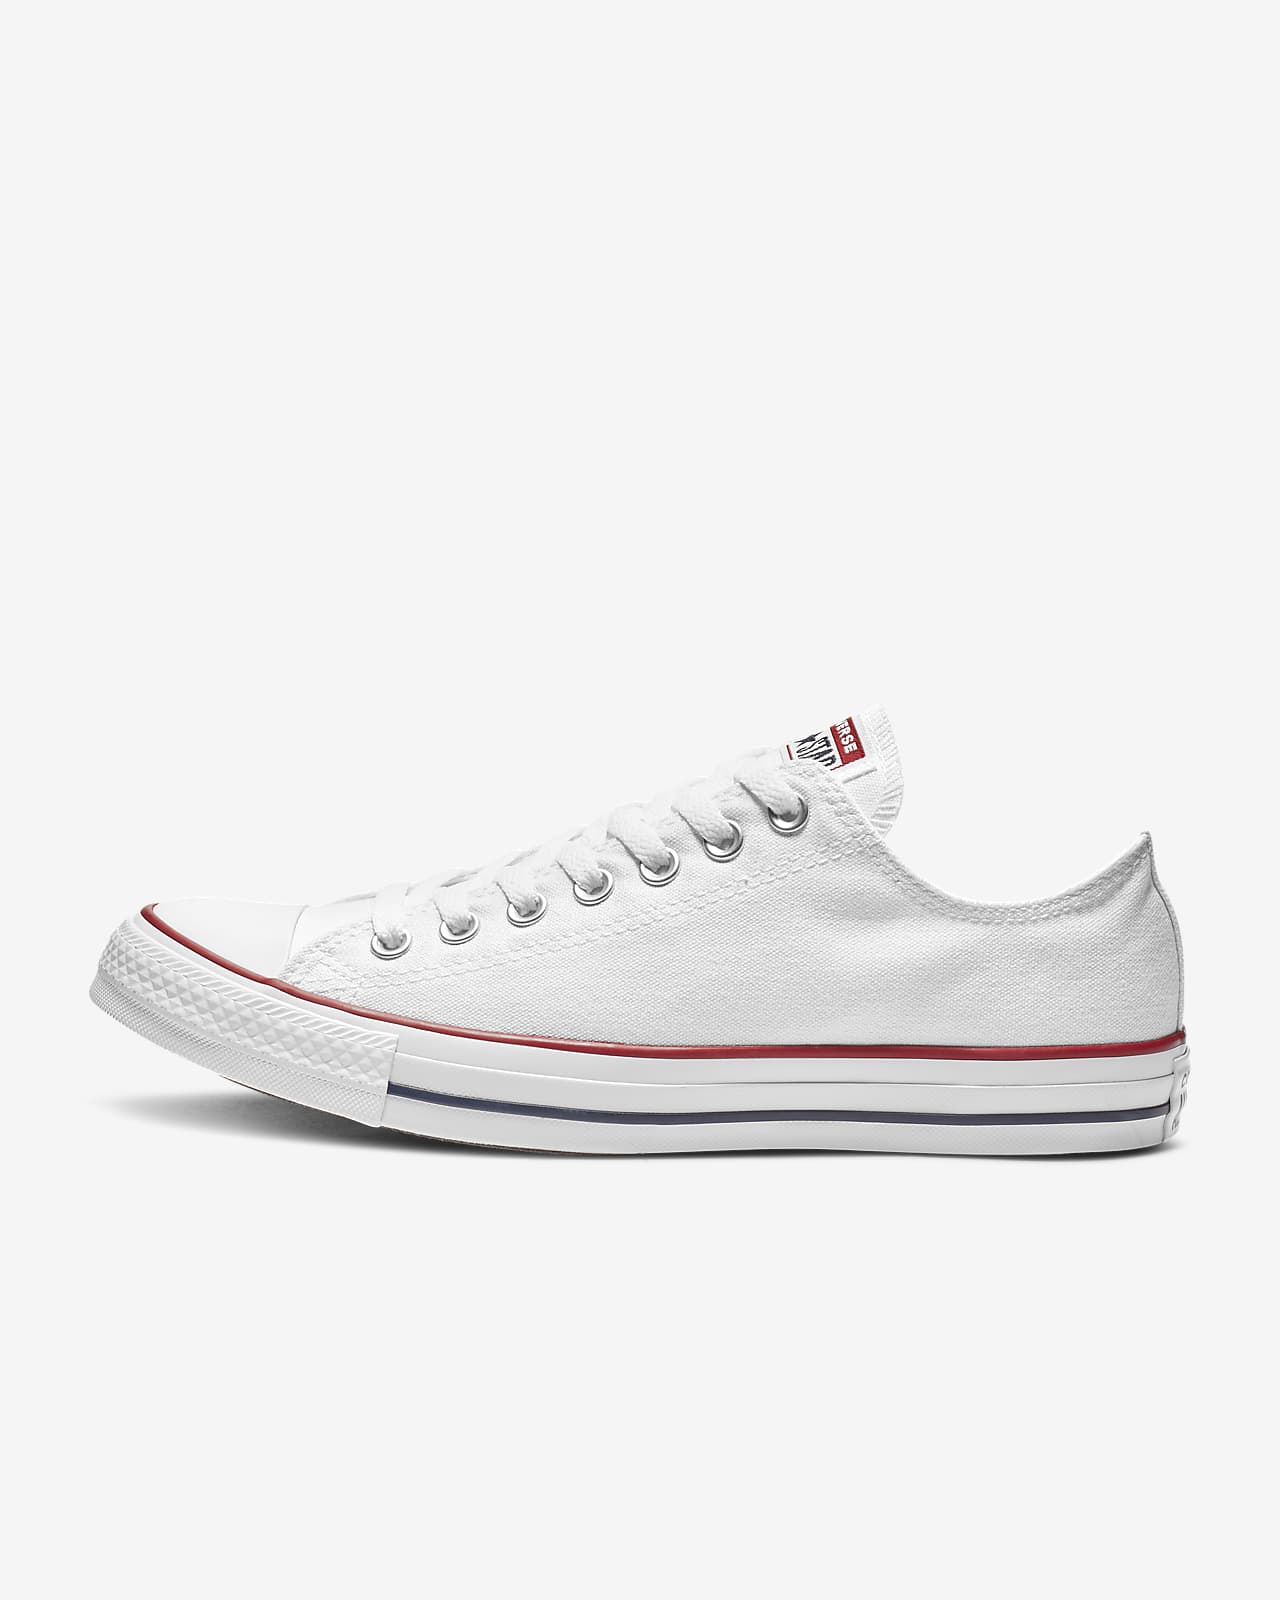 Converse Chuck Taylor All Star Low Top Unisex Shoe. 